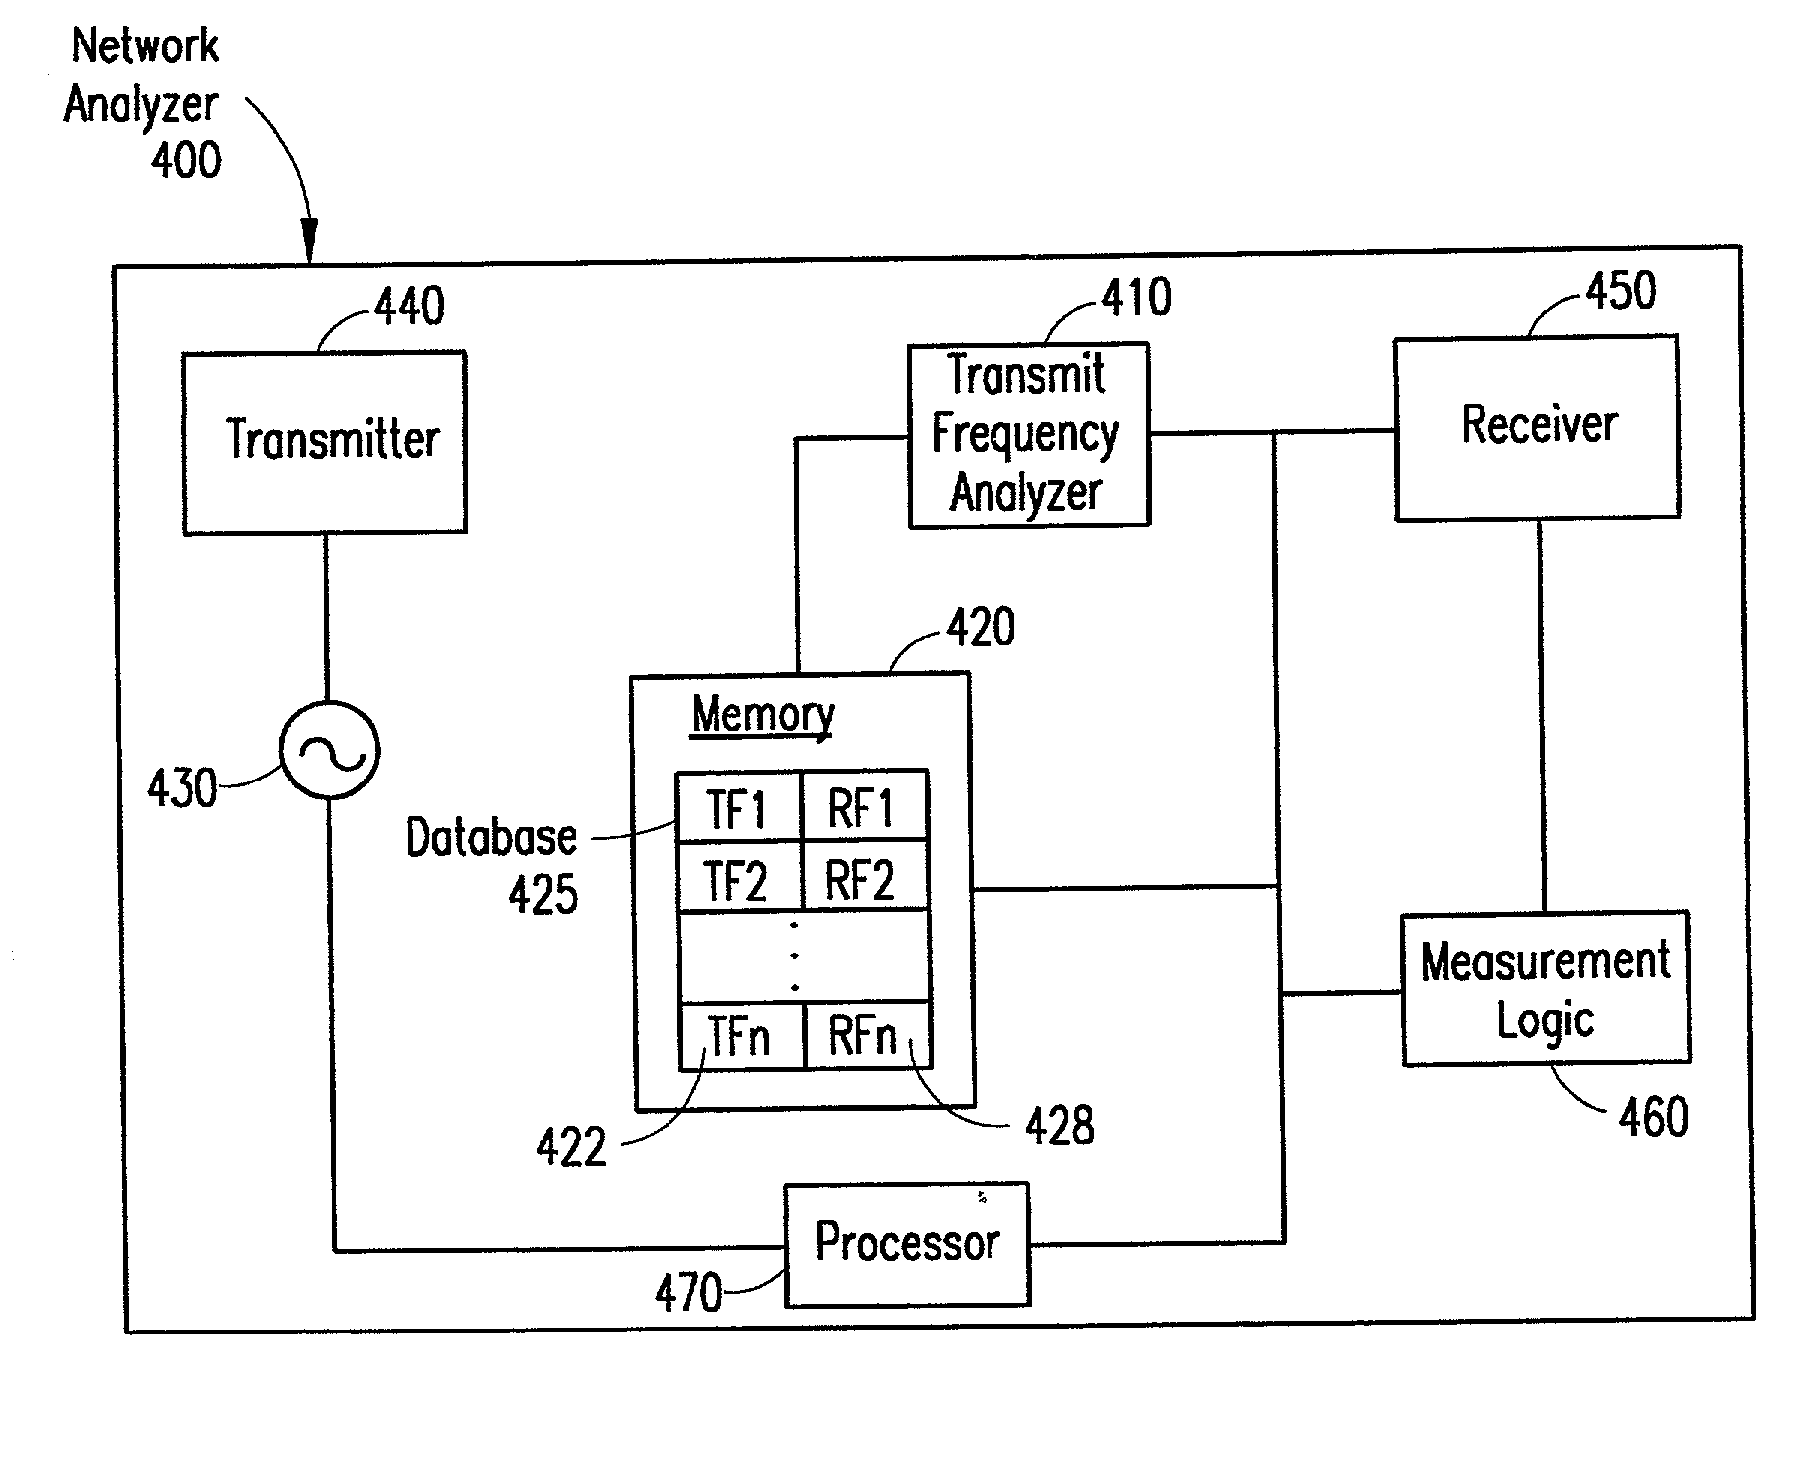 Network analyzer for measuring the antenna return loss in a live cellular network